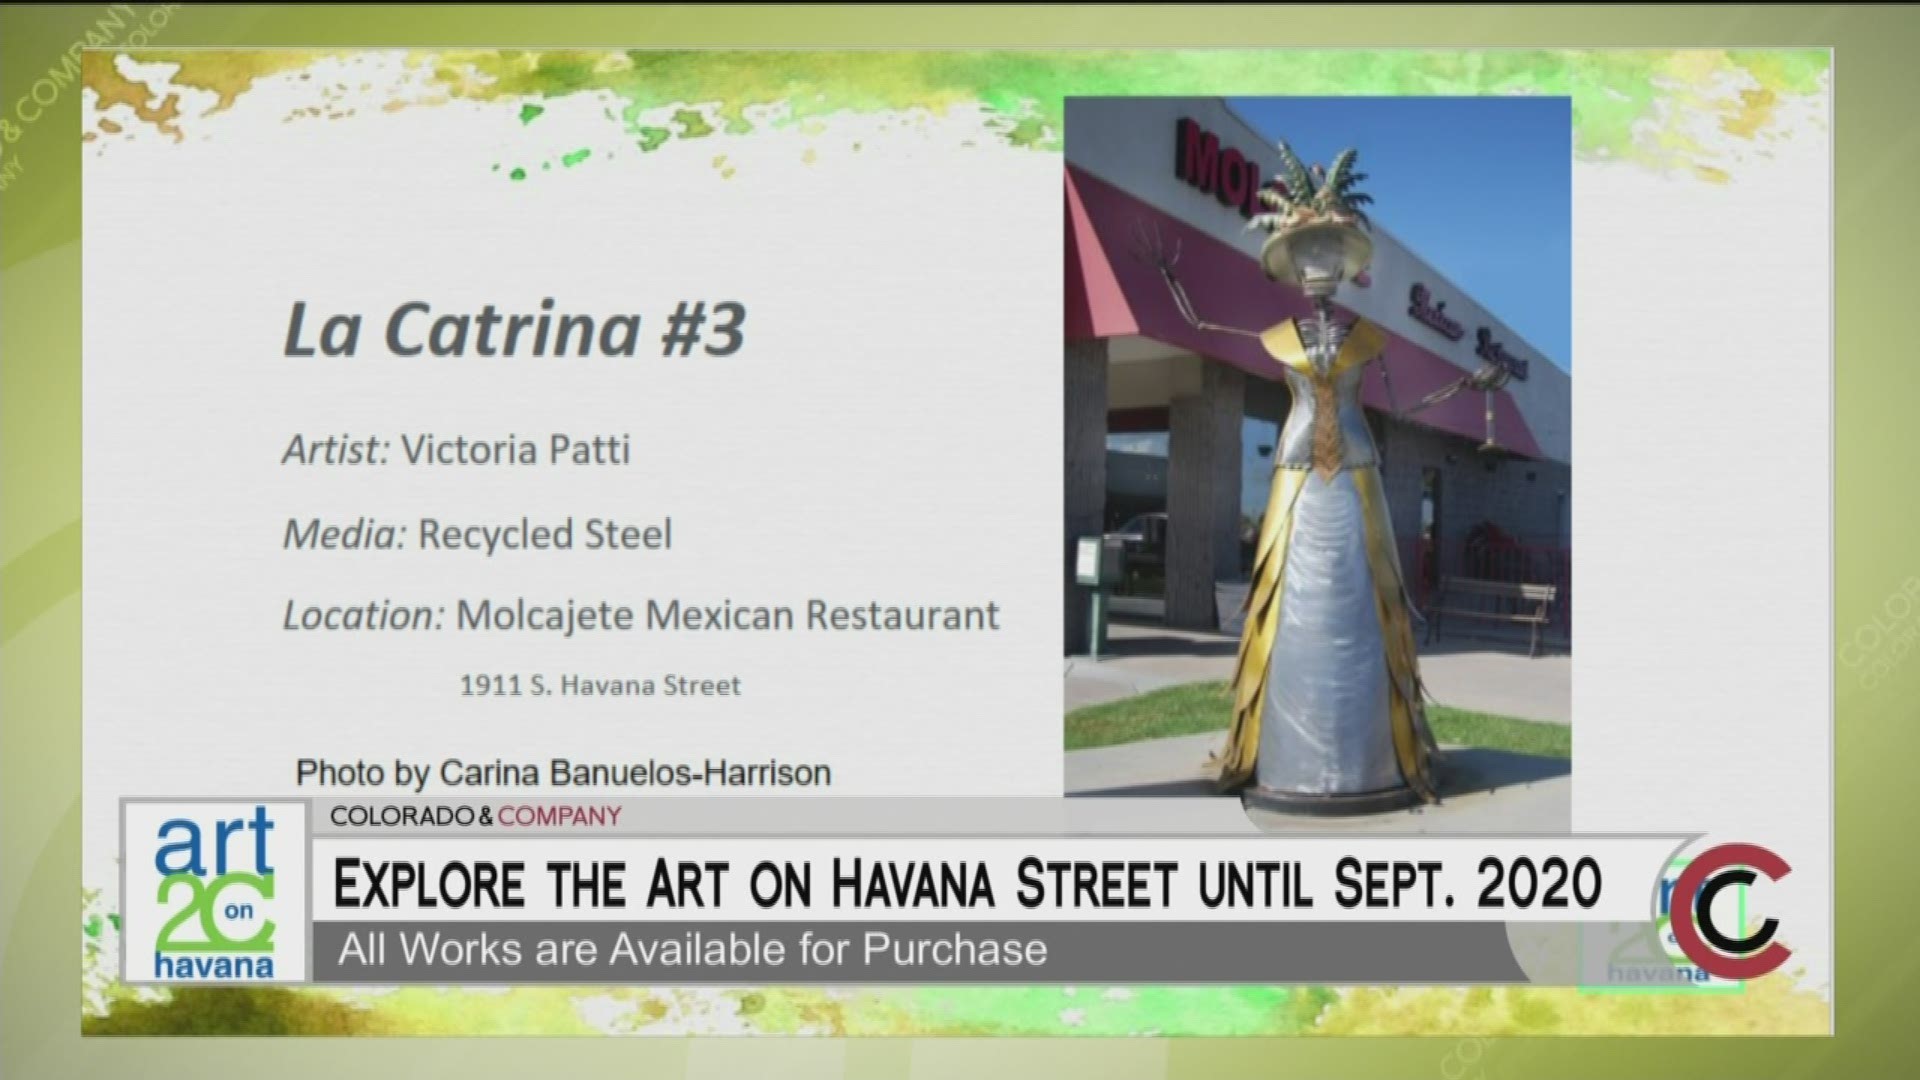 Check out the public art along Havana Street. The displays will be up through September 2020 and all are available for purchase. Learn more at www.OnHavanaStreet.com